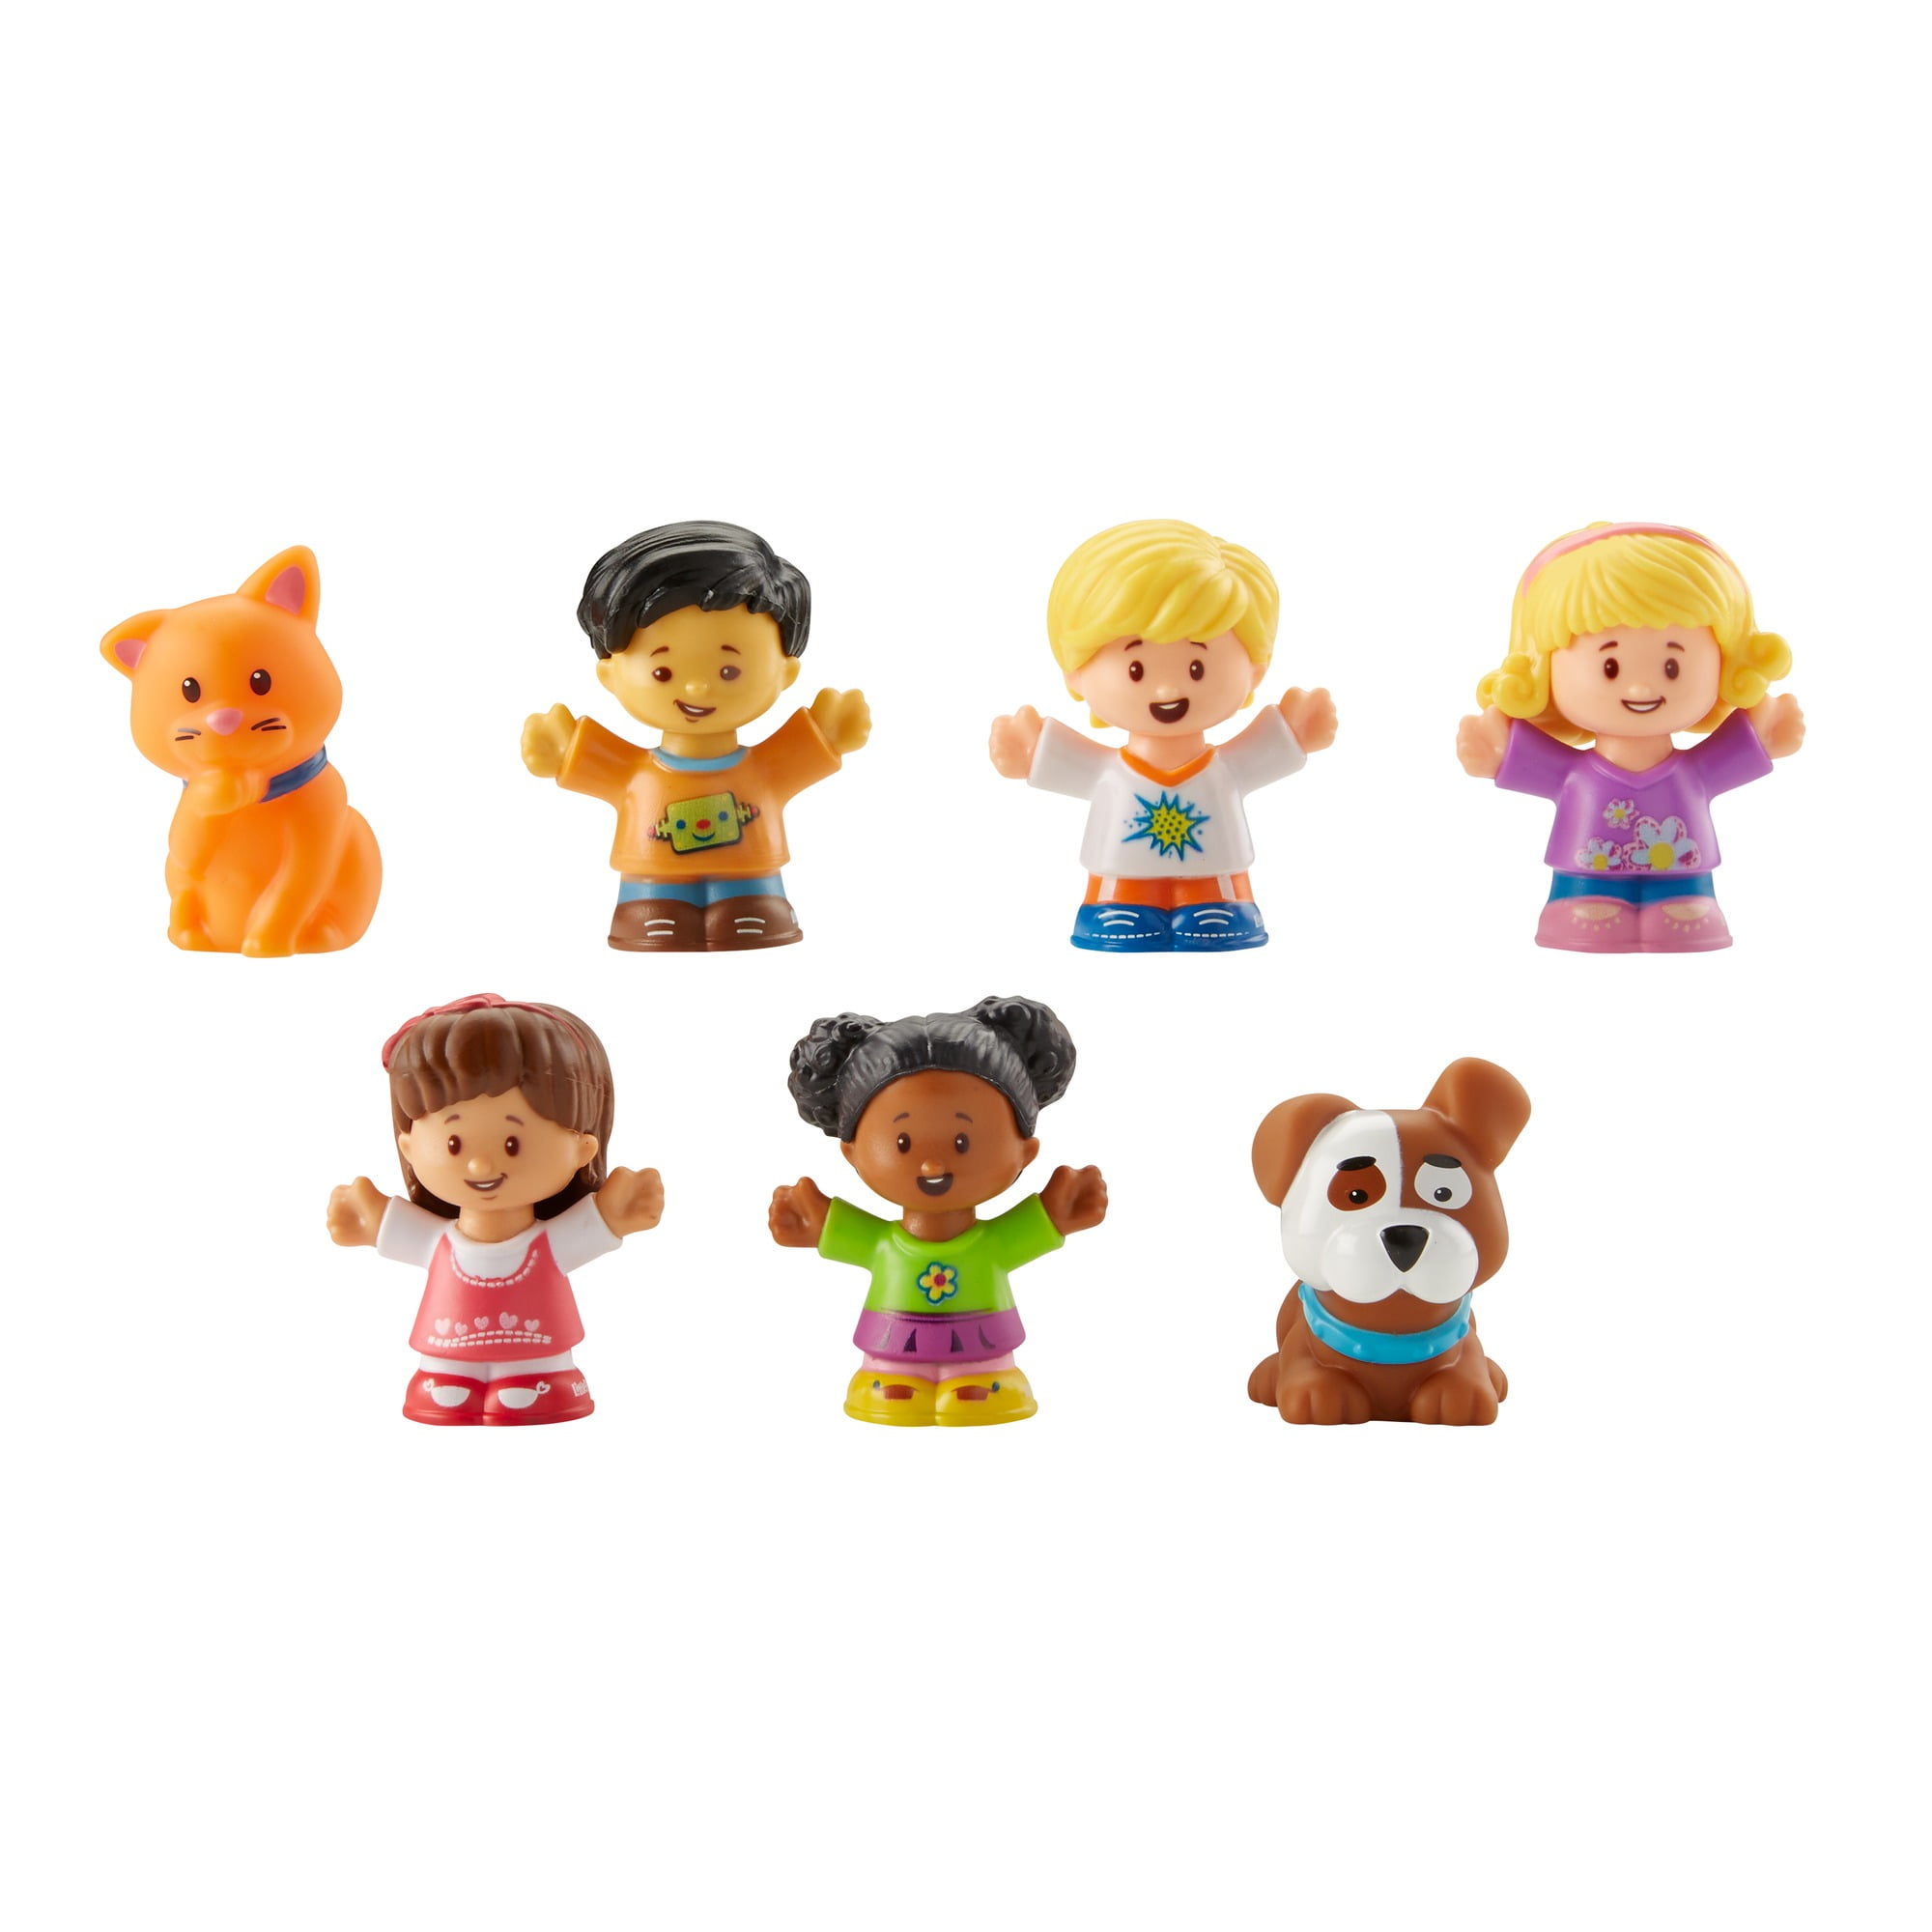 New Fisher Price Little People Replacement Parts and Figures 